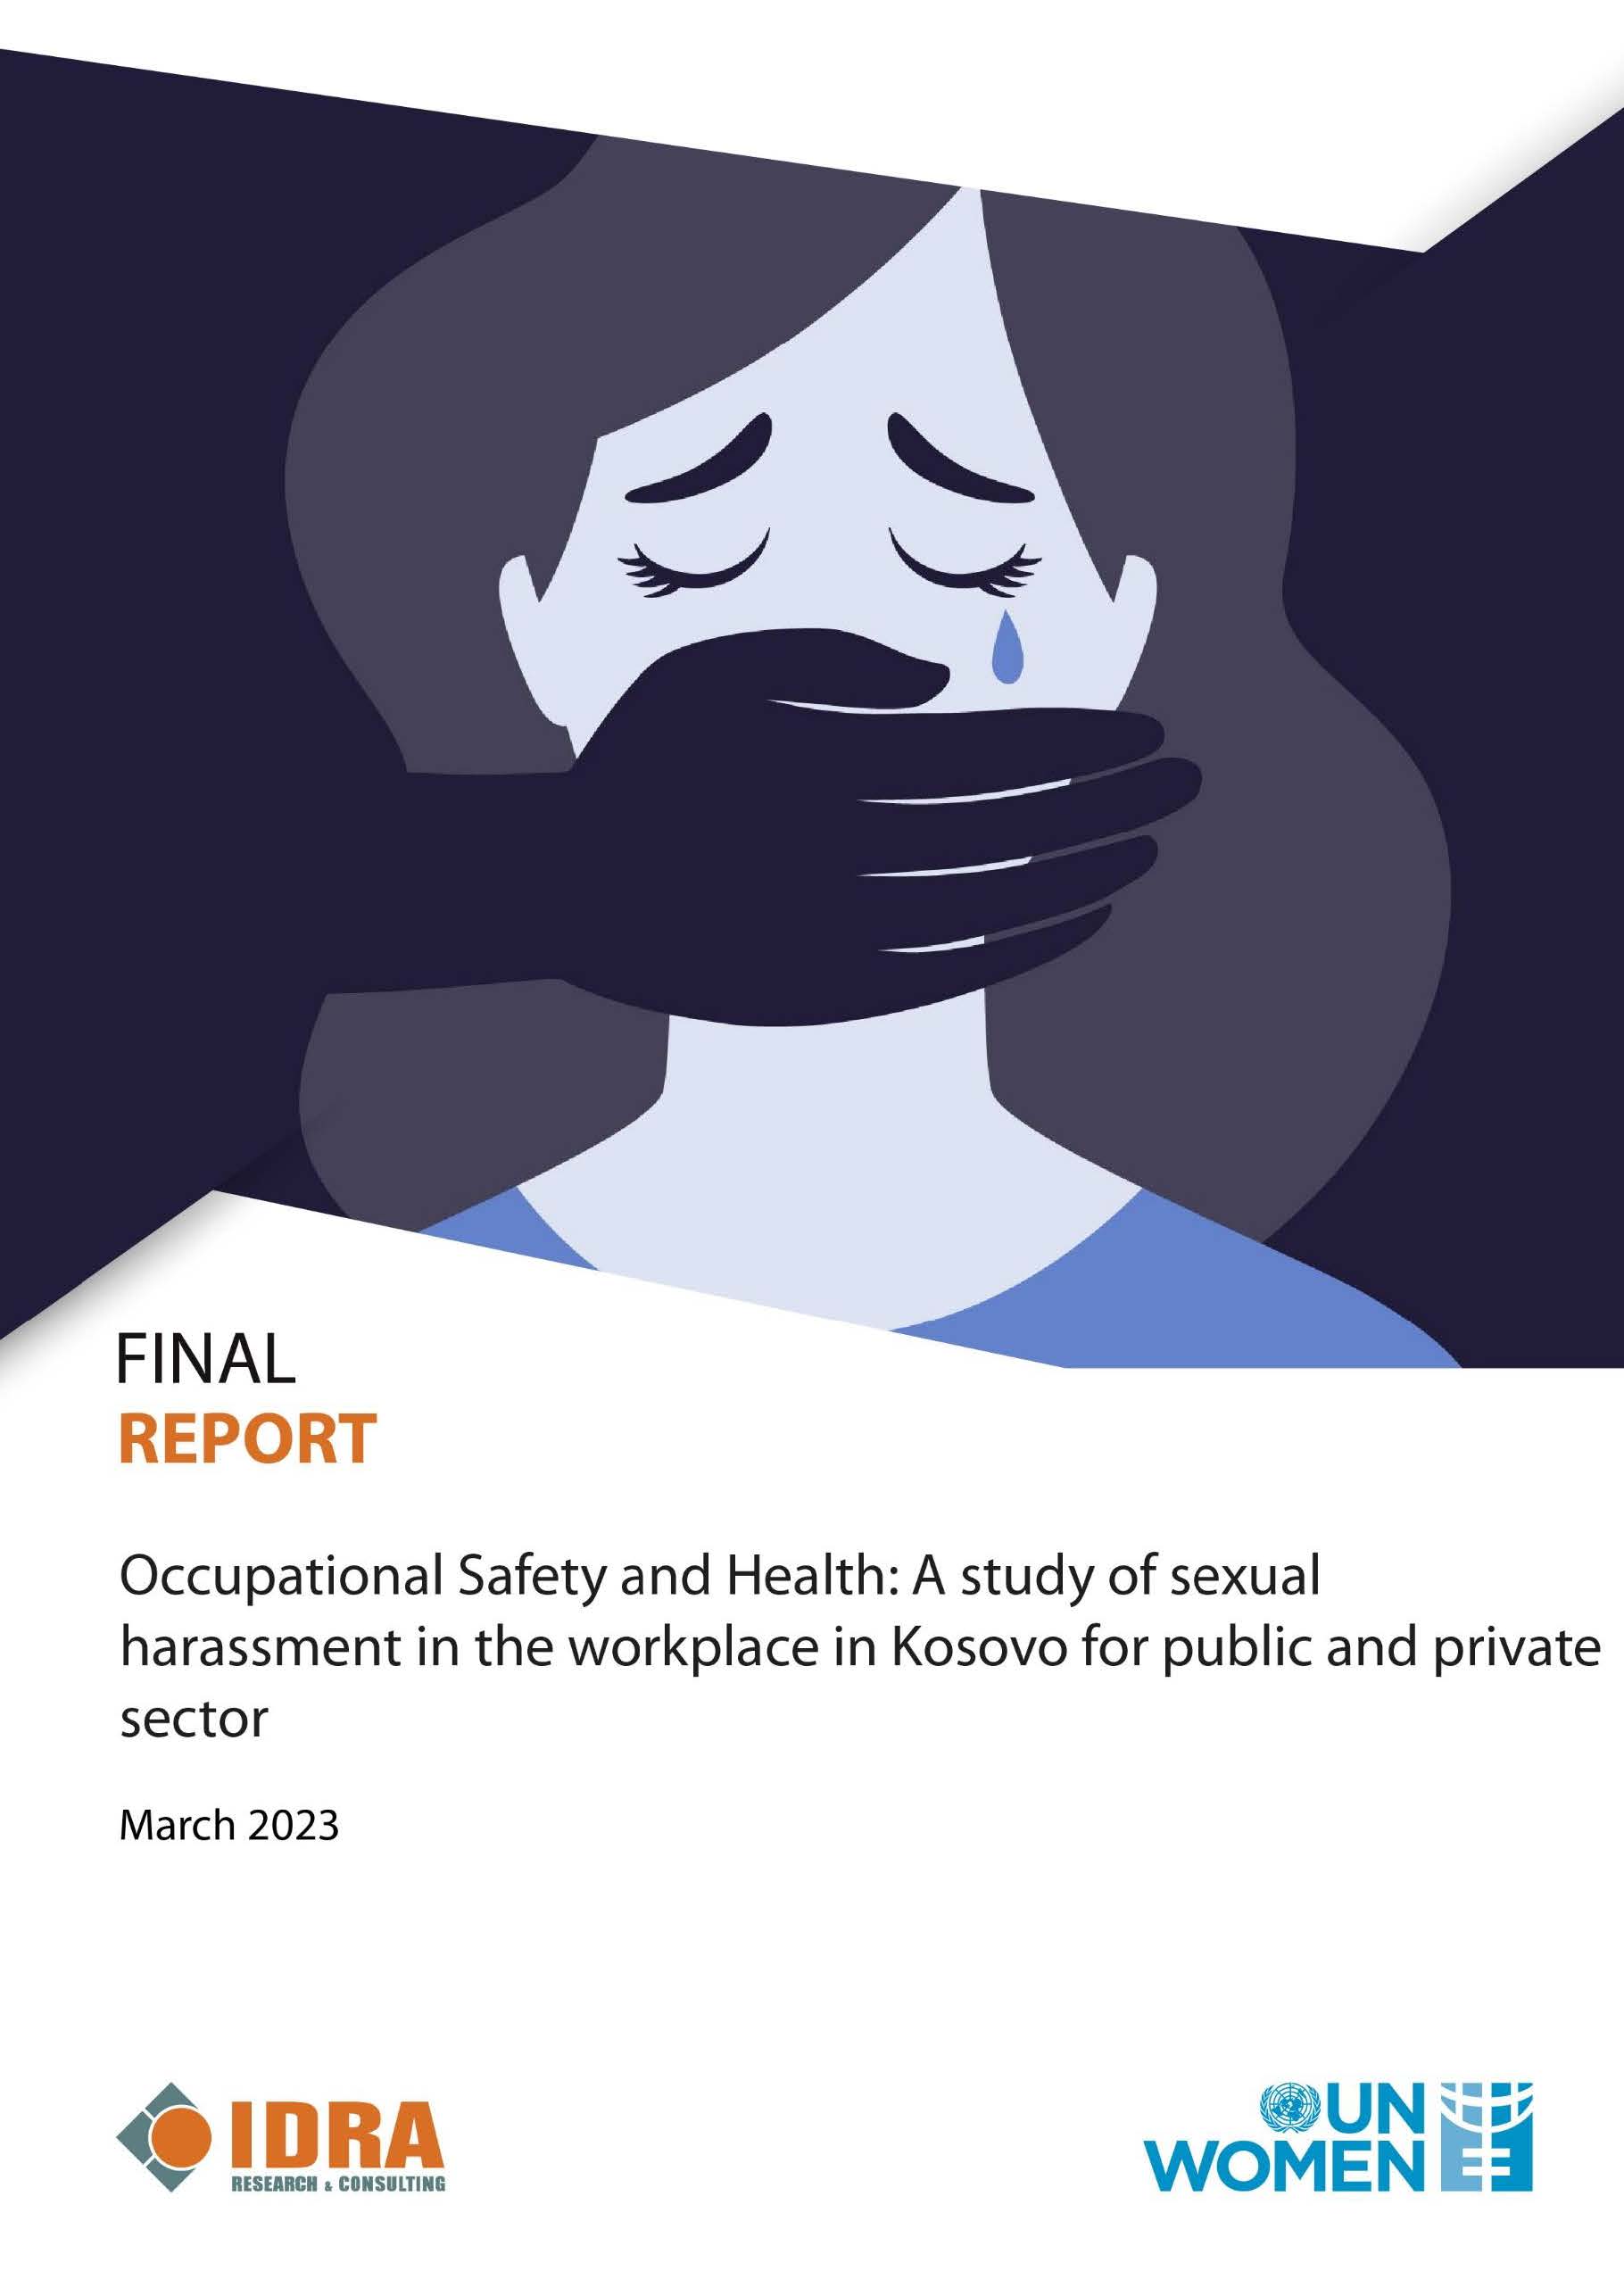 Safety and Health at Work: A study of cases of sexual harassment at the workplace in Kosovo in the public and private sector